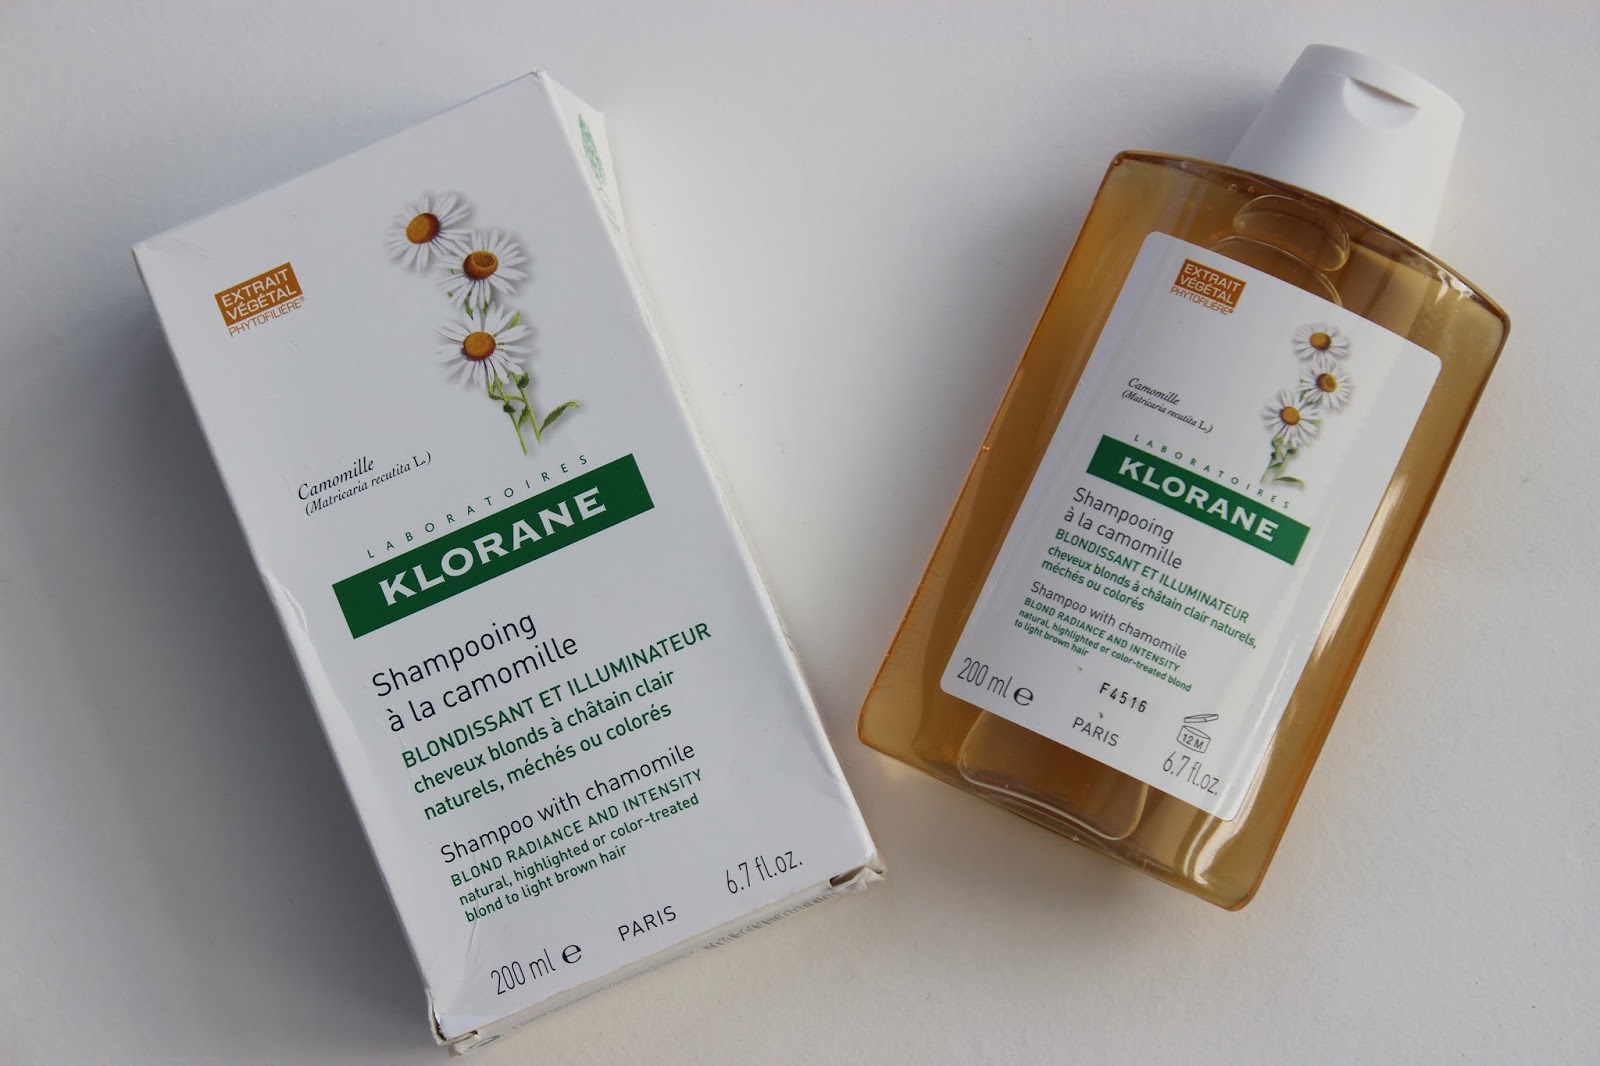 Review: Camomile Shampoo for Blonde Highlights | SKIN DEEP